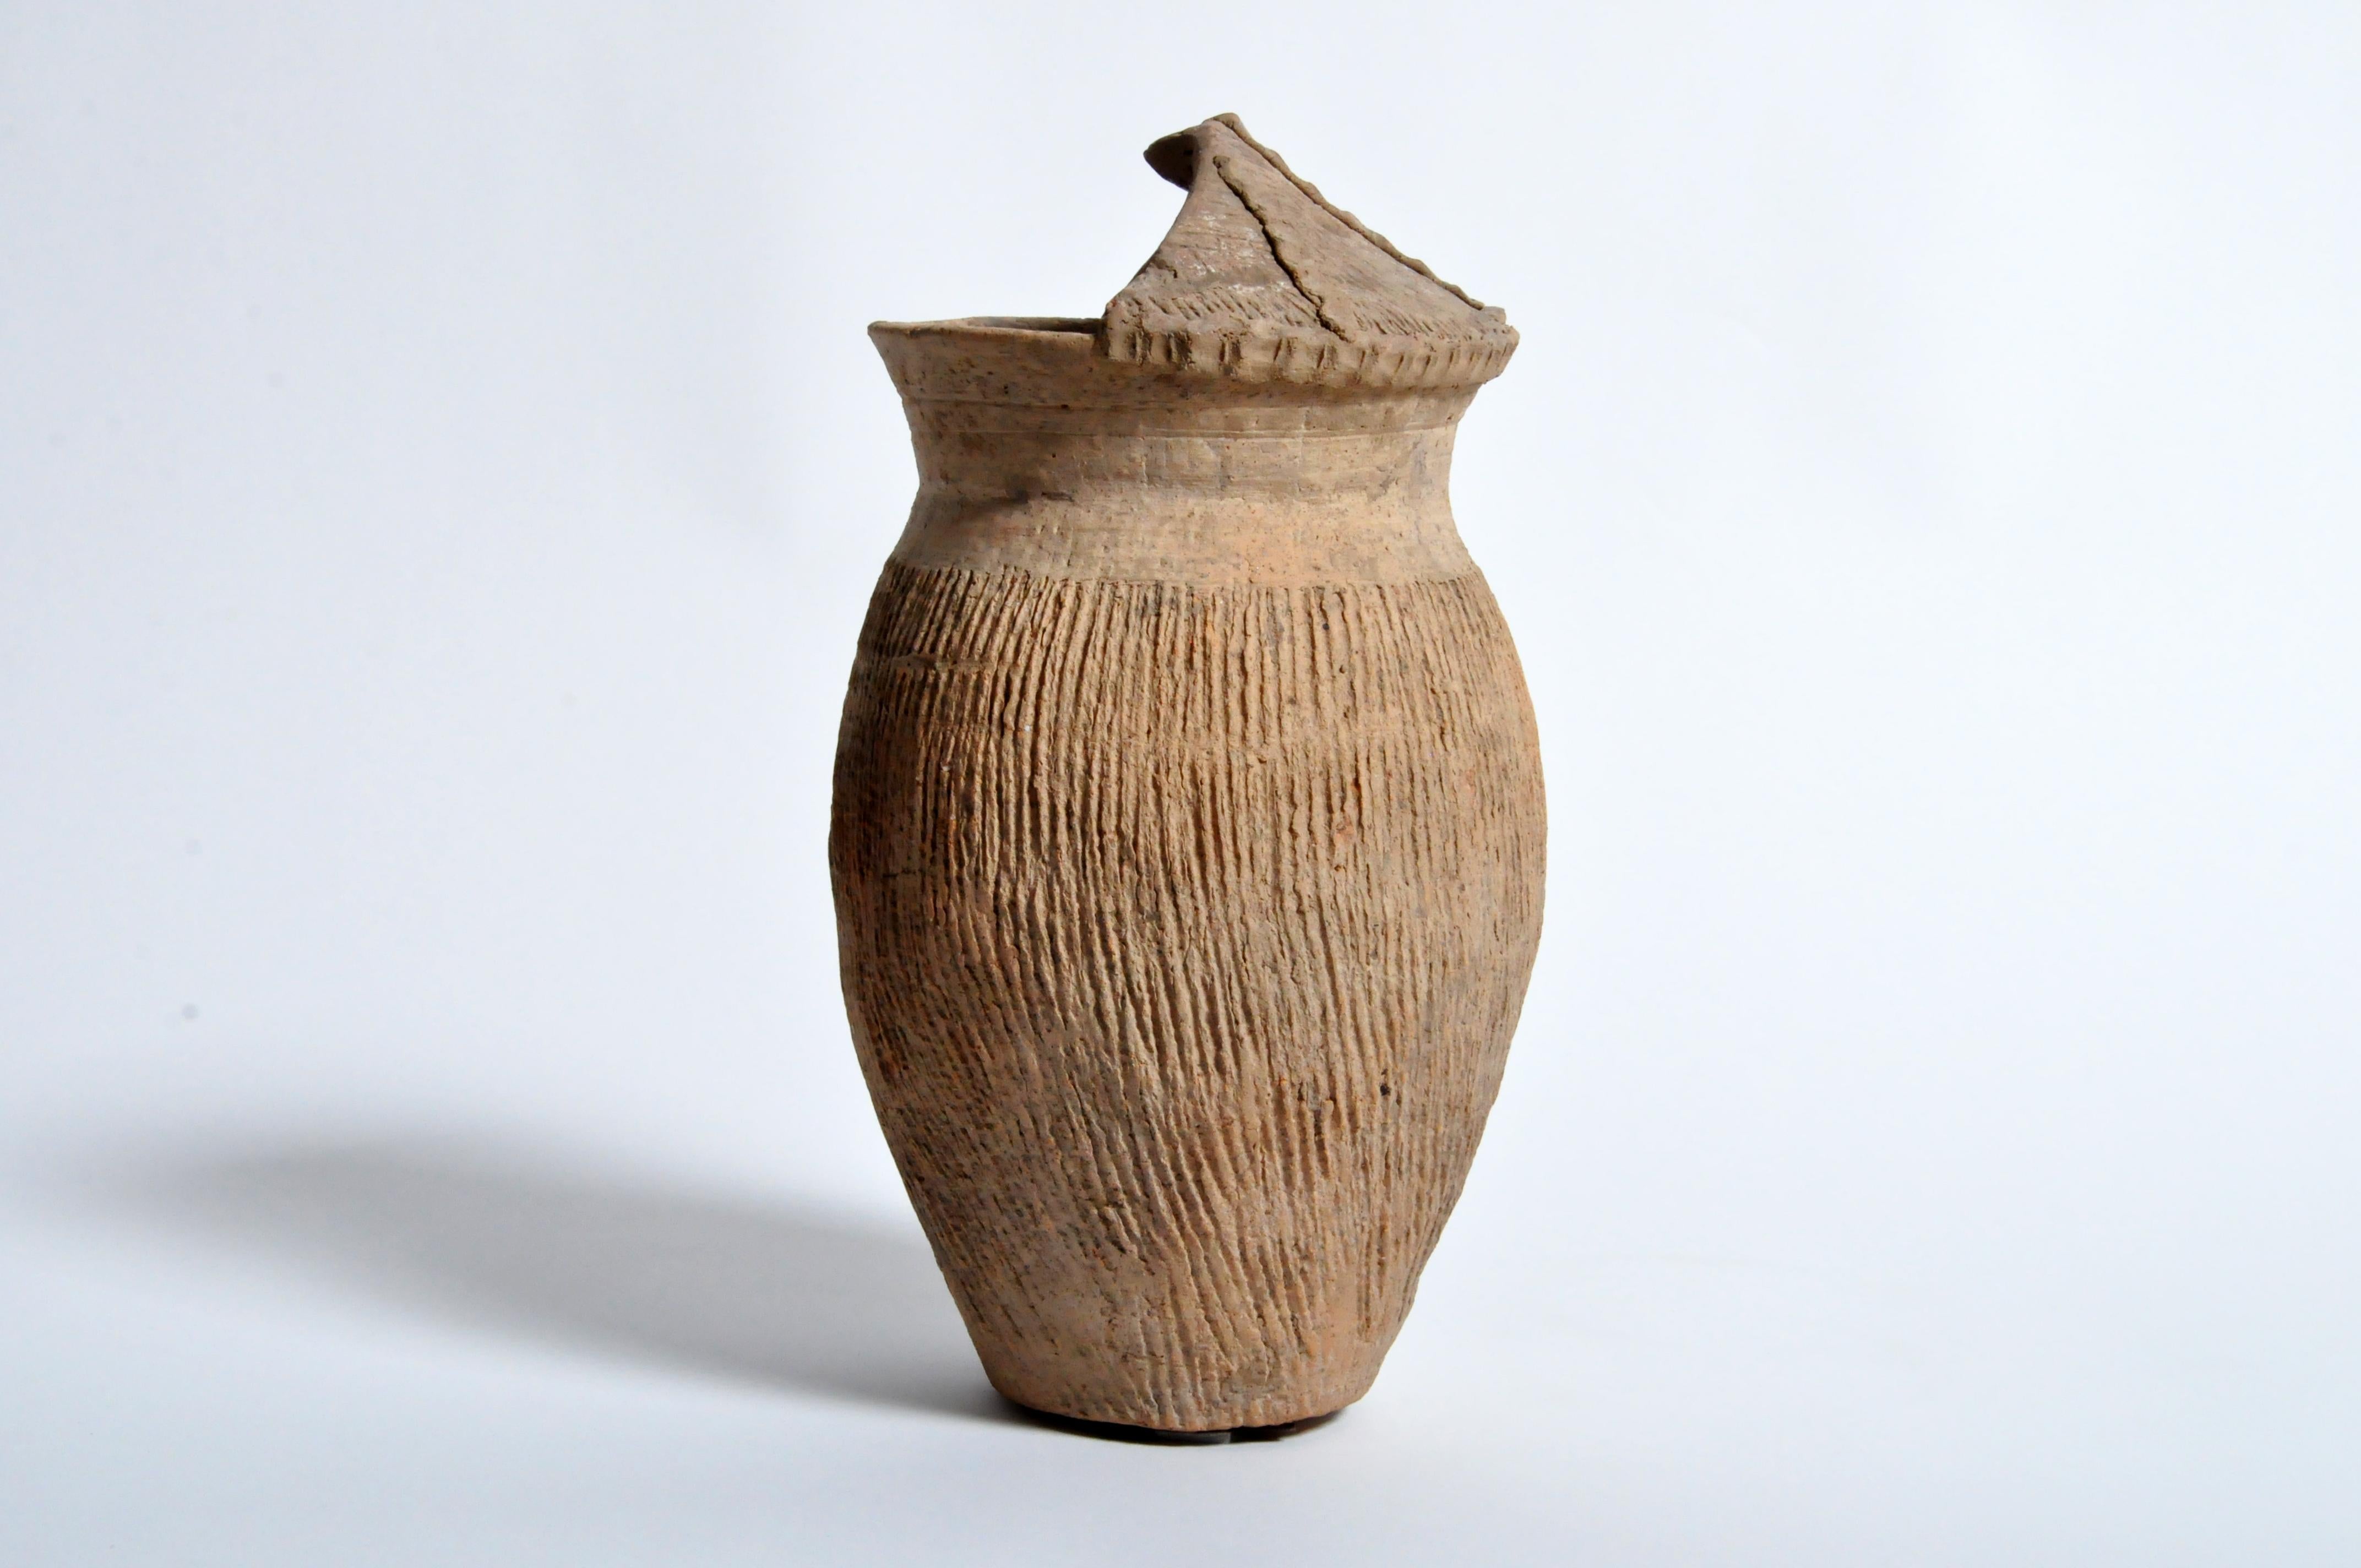 Northern China has a settled history that goes back more than 5,000 years. All along the western reaches of the Yellow River settlements sprung up and some of the first evidence we have is in the form of pottery. This terra cotta vessel was buried